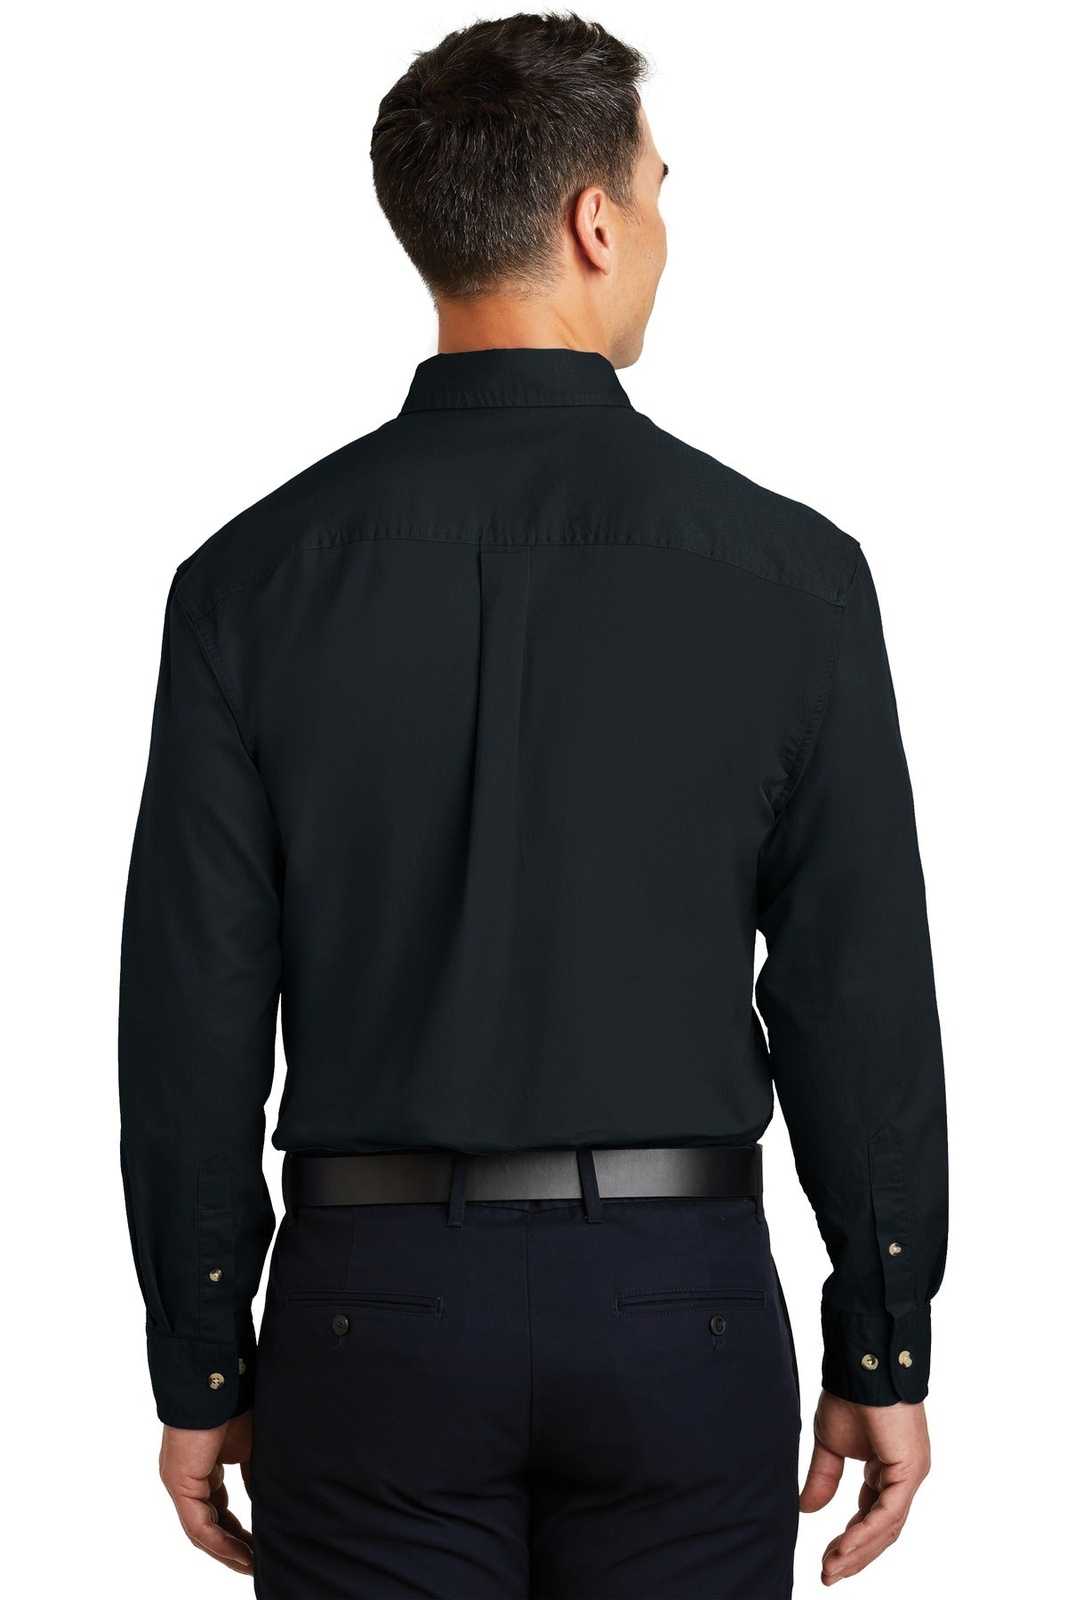 Port Authority S600T Long Sleeve Twill Shirt - Classic Navy - HIT a Double - 2